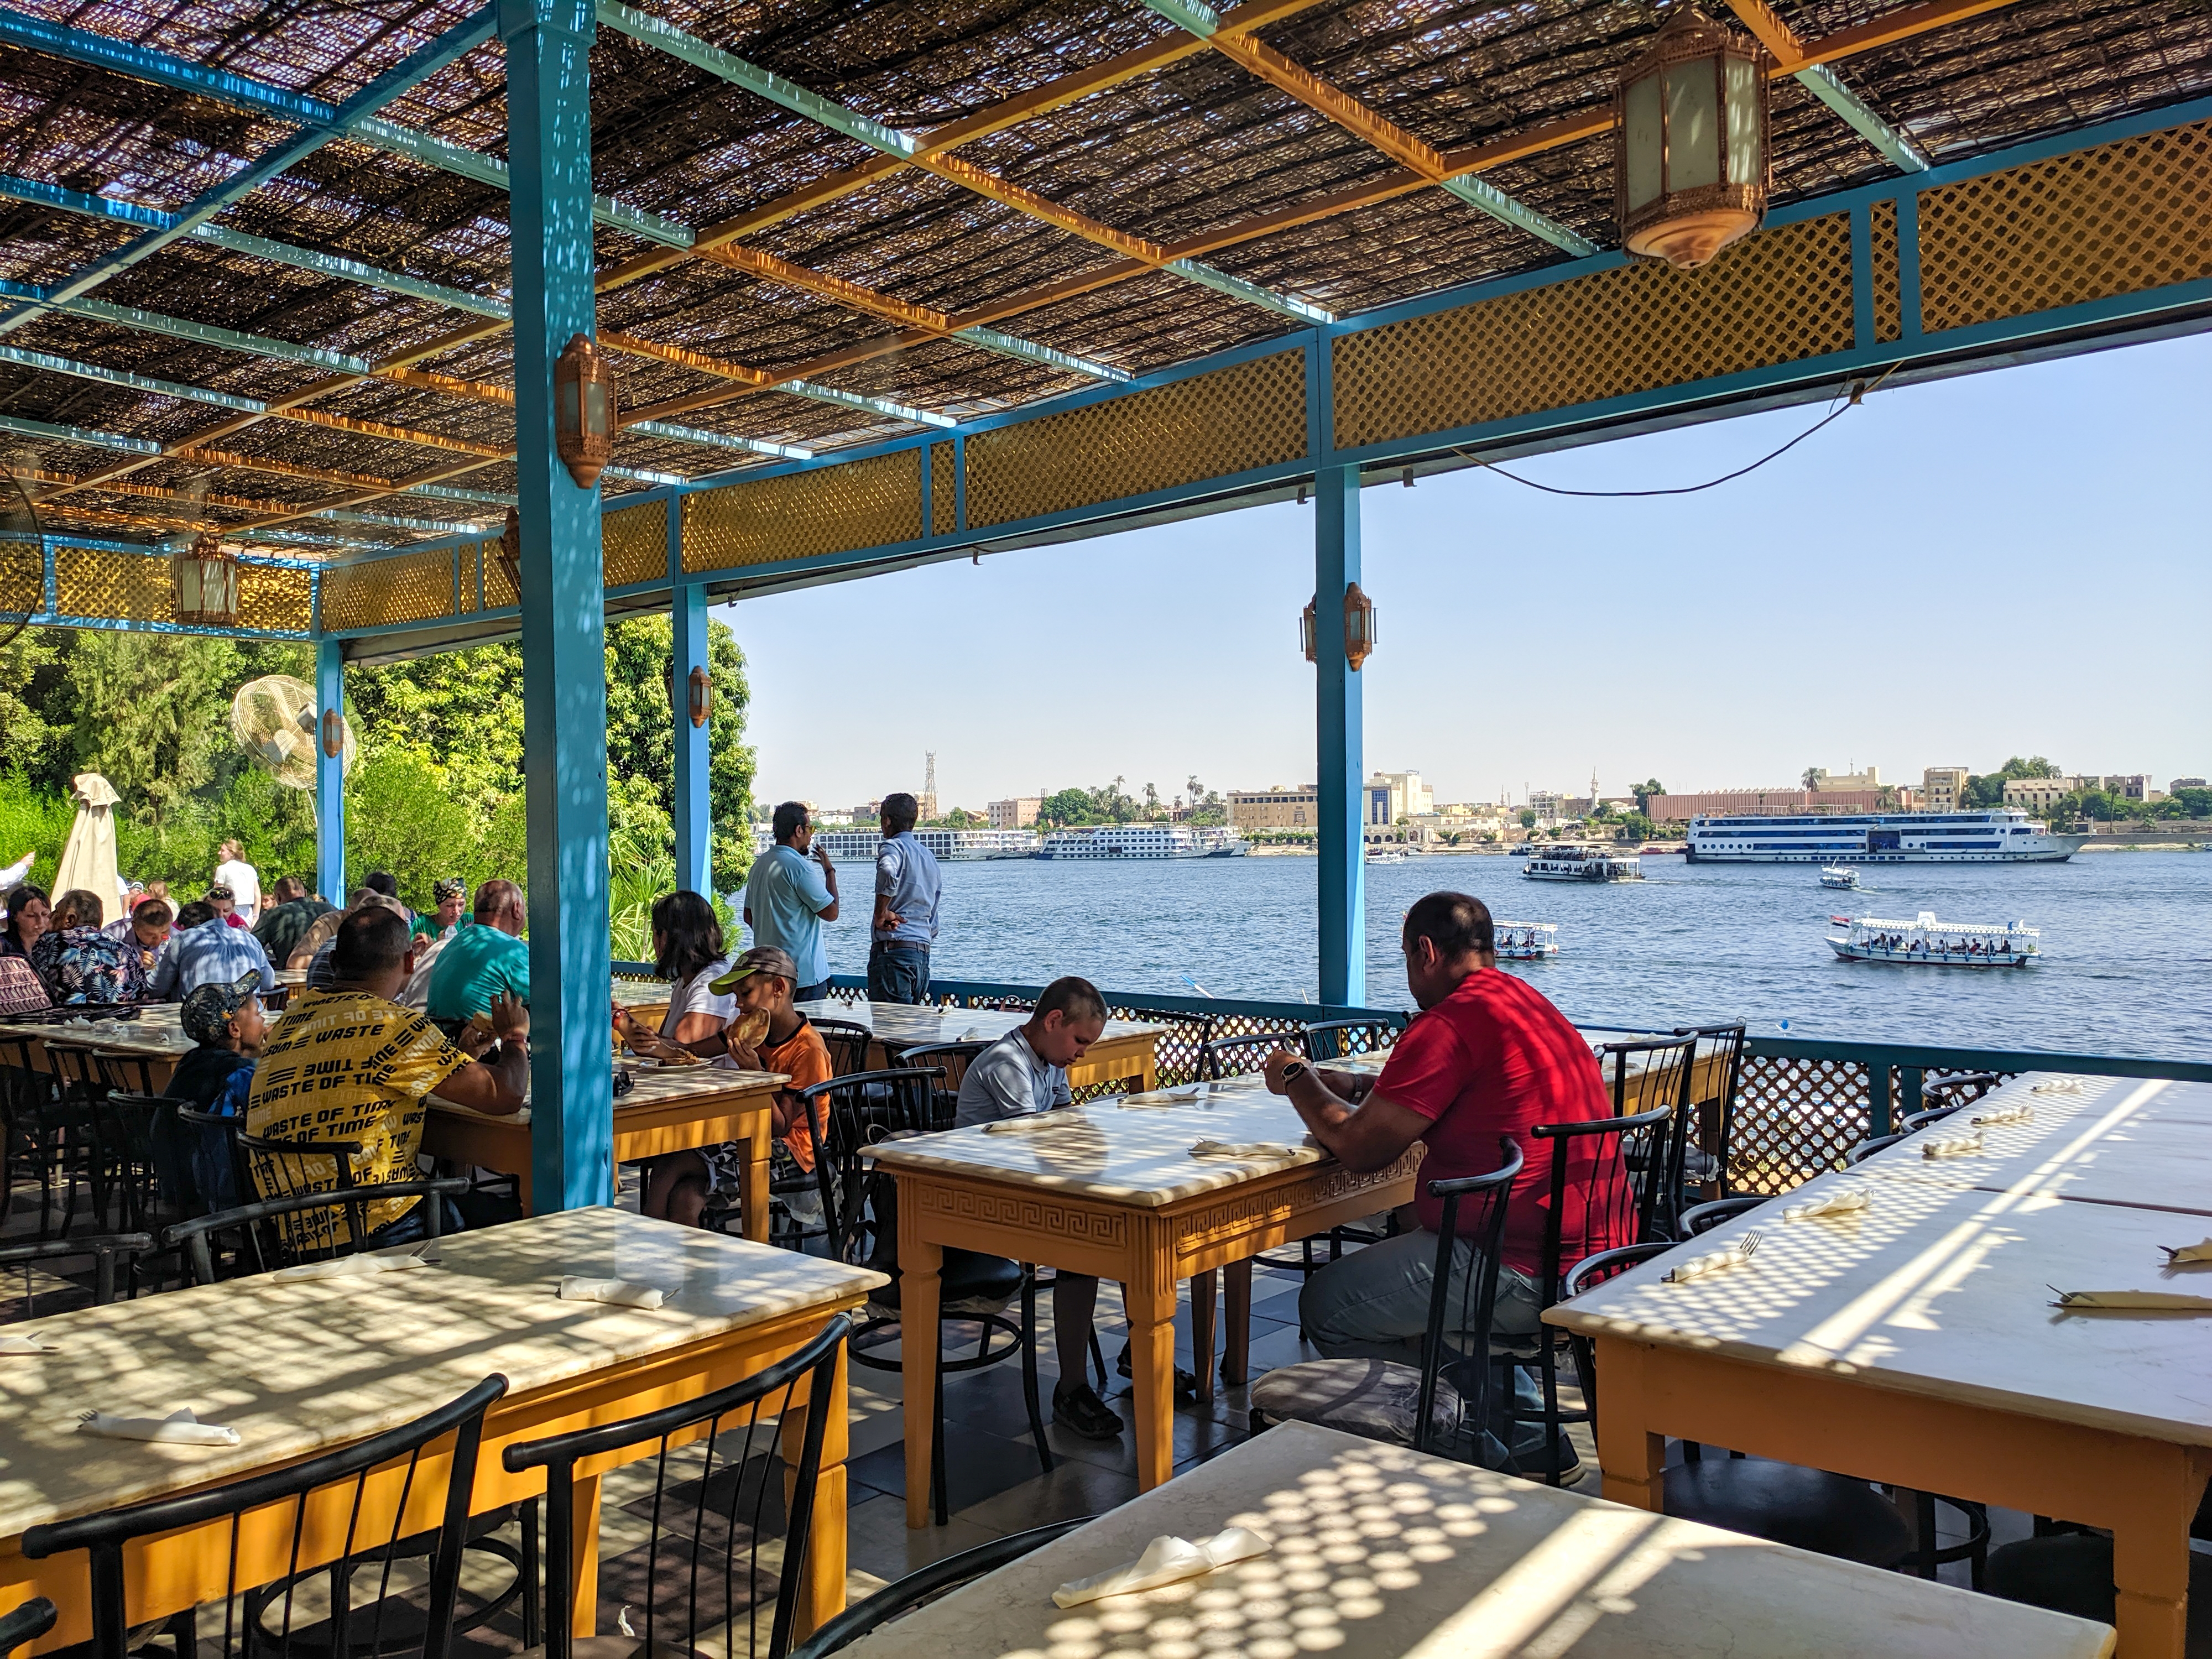 : People sit in a cafe under a roof overlooking the Nile River.